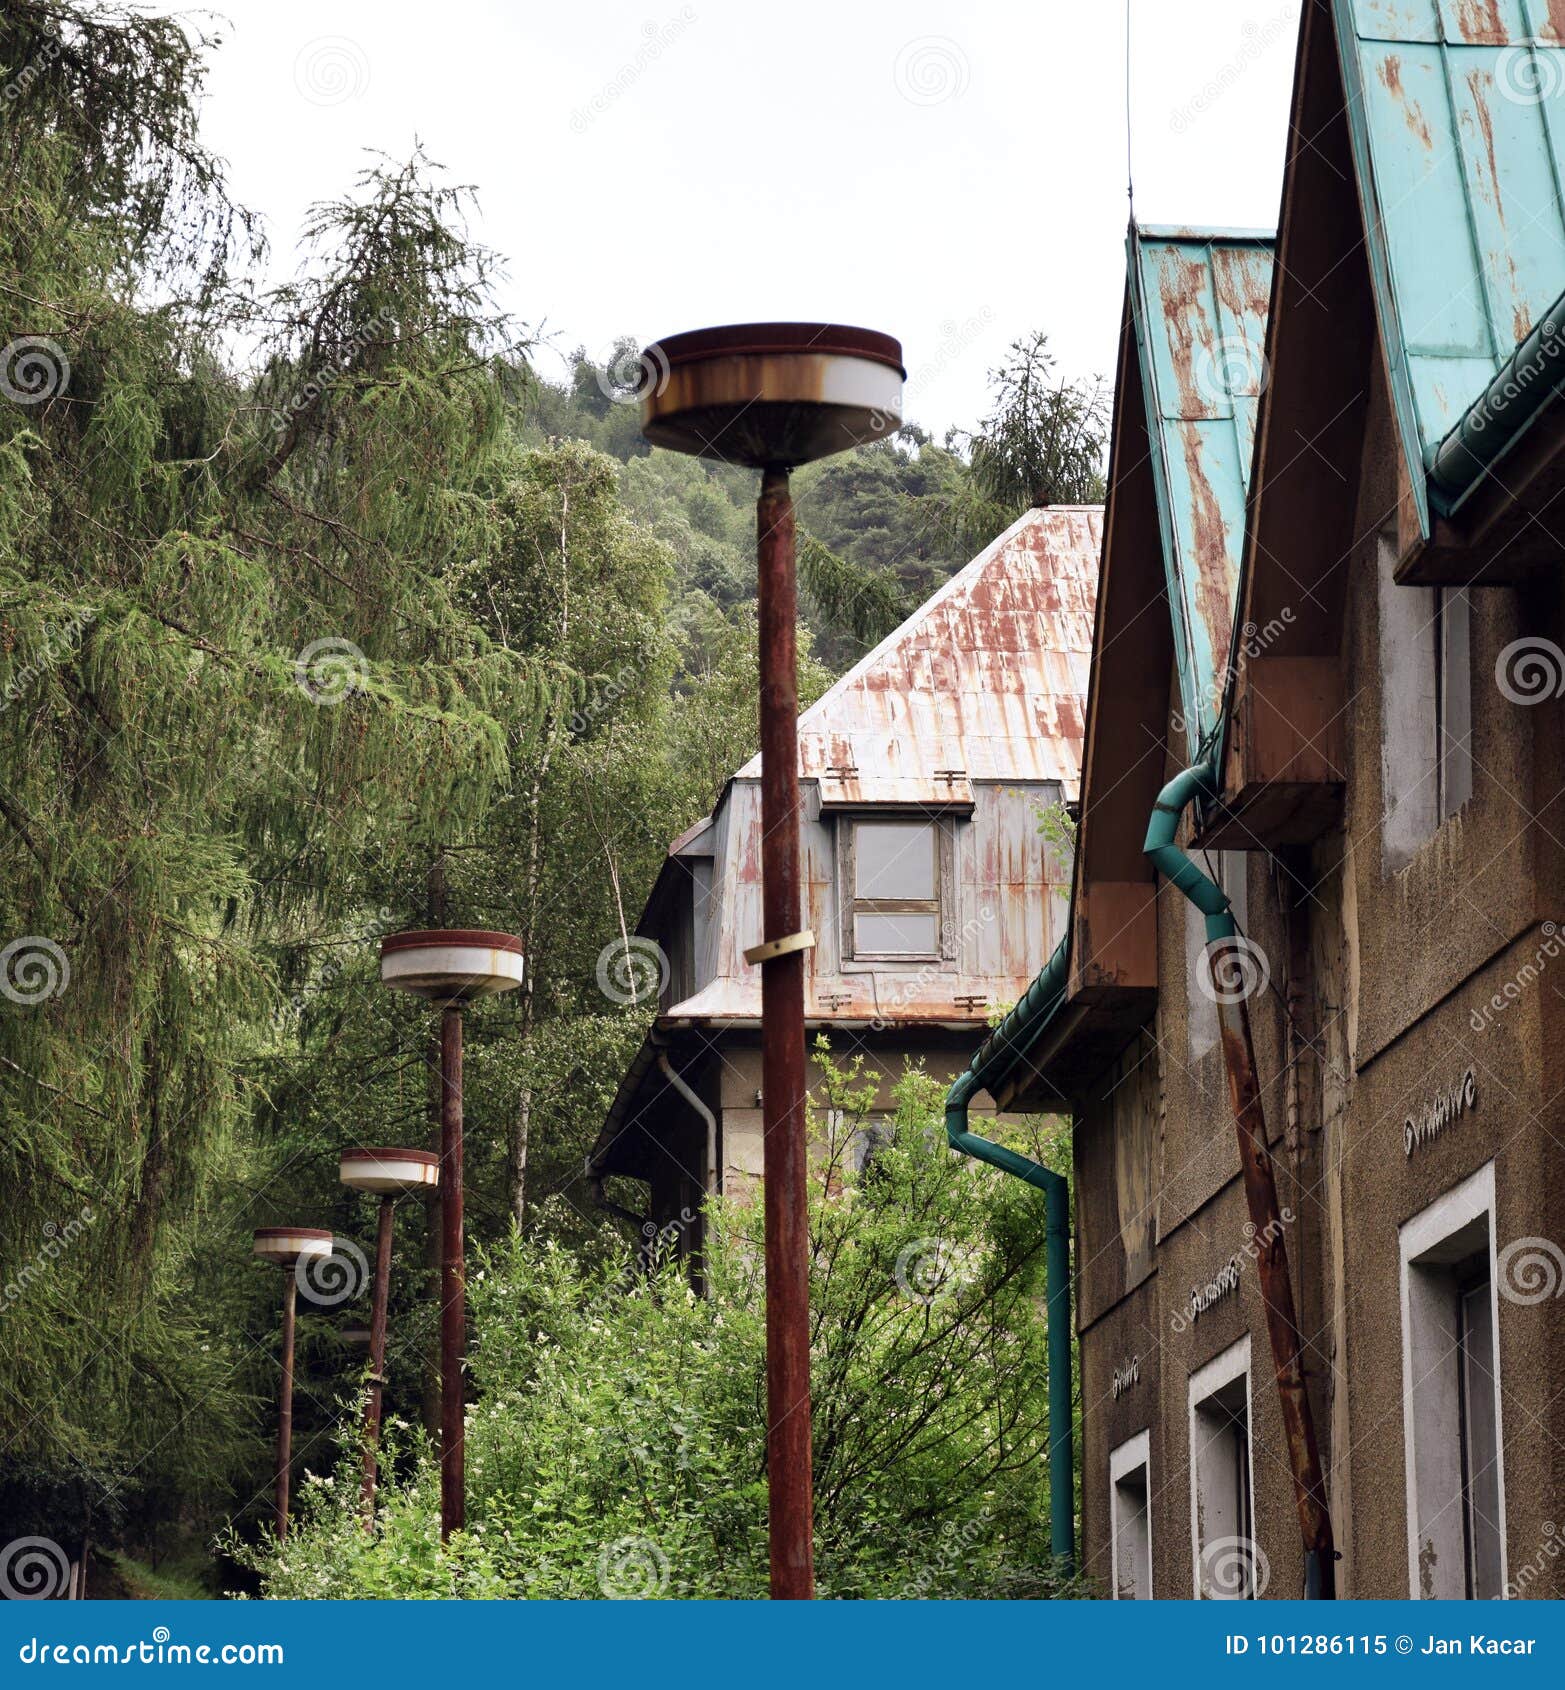 former accomodation resort with rusty old lamps